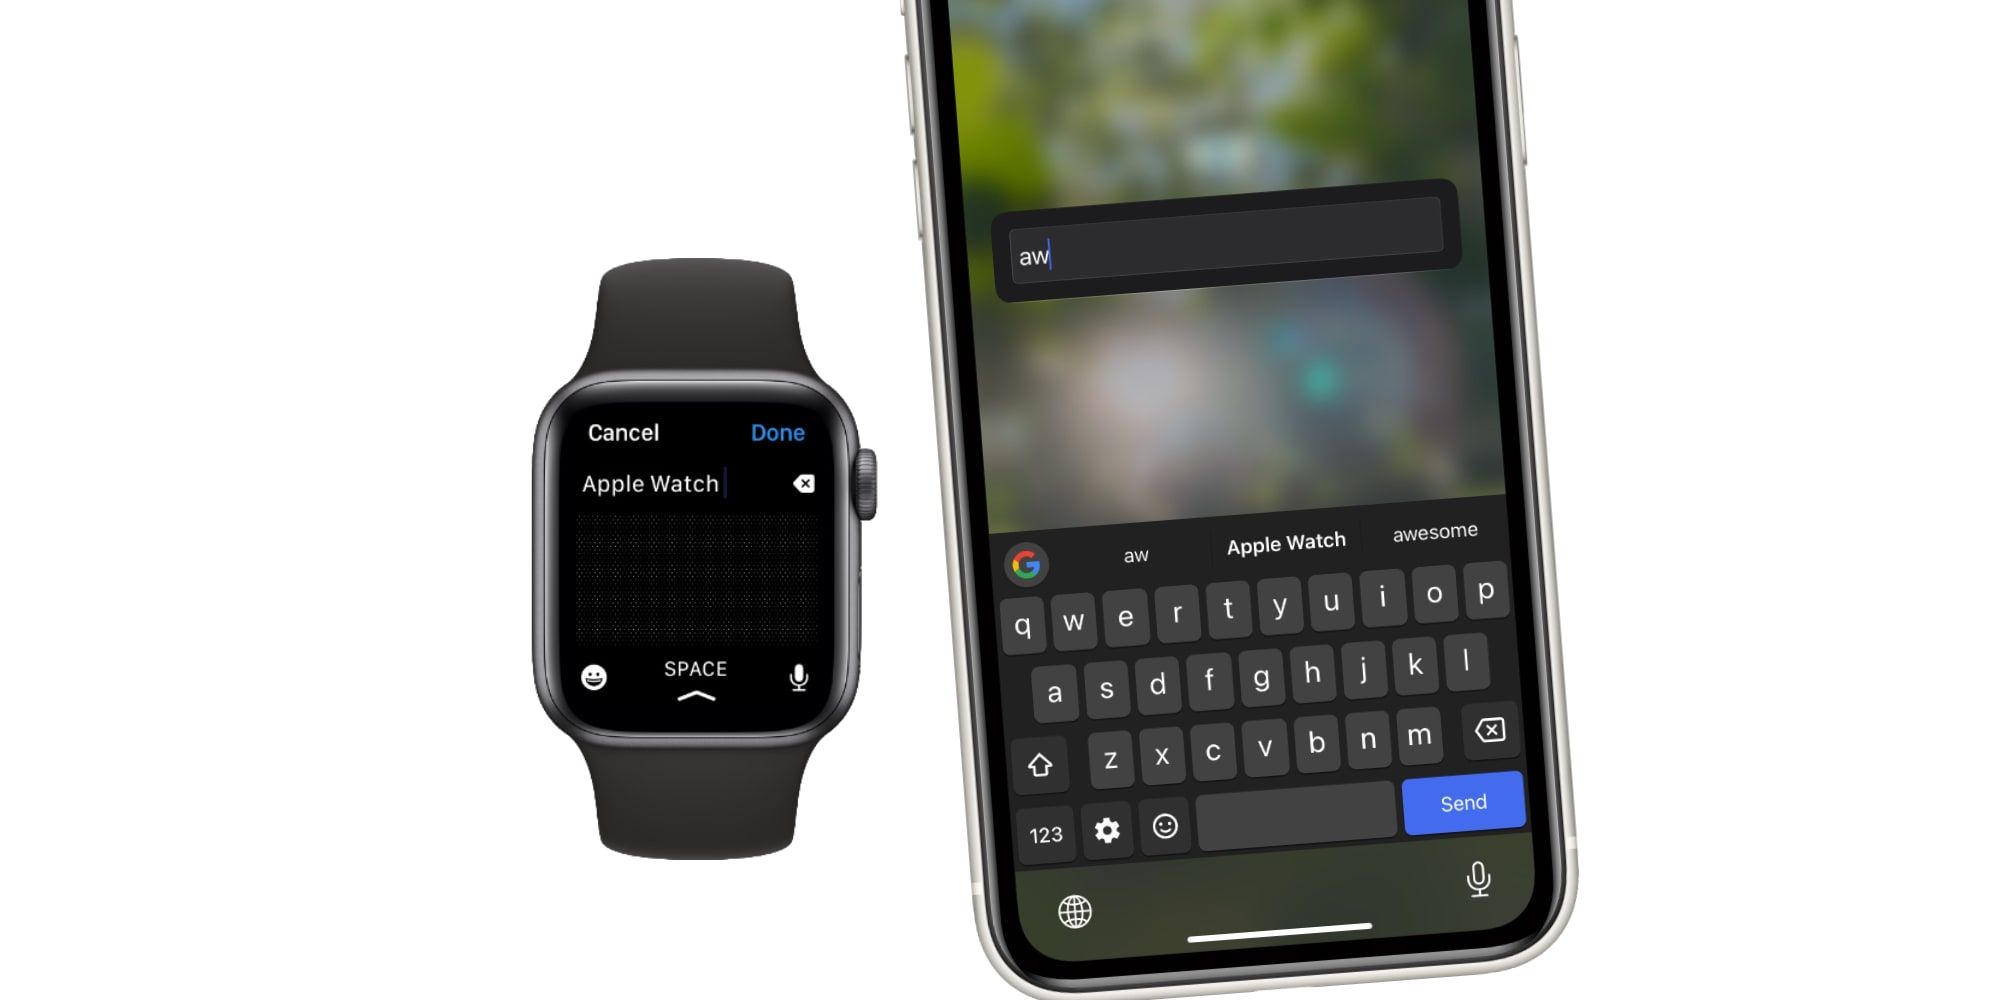 Apple Watch iPhone Keyboard Text Entry Gboard